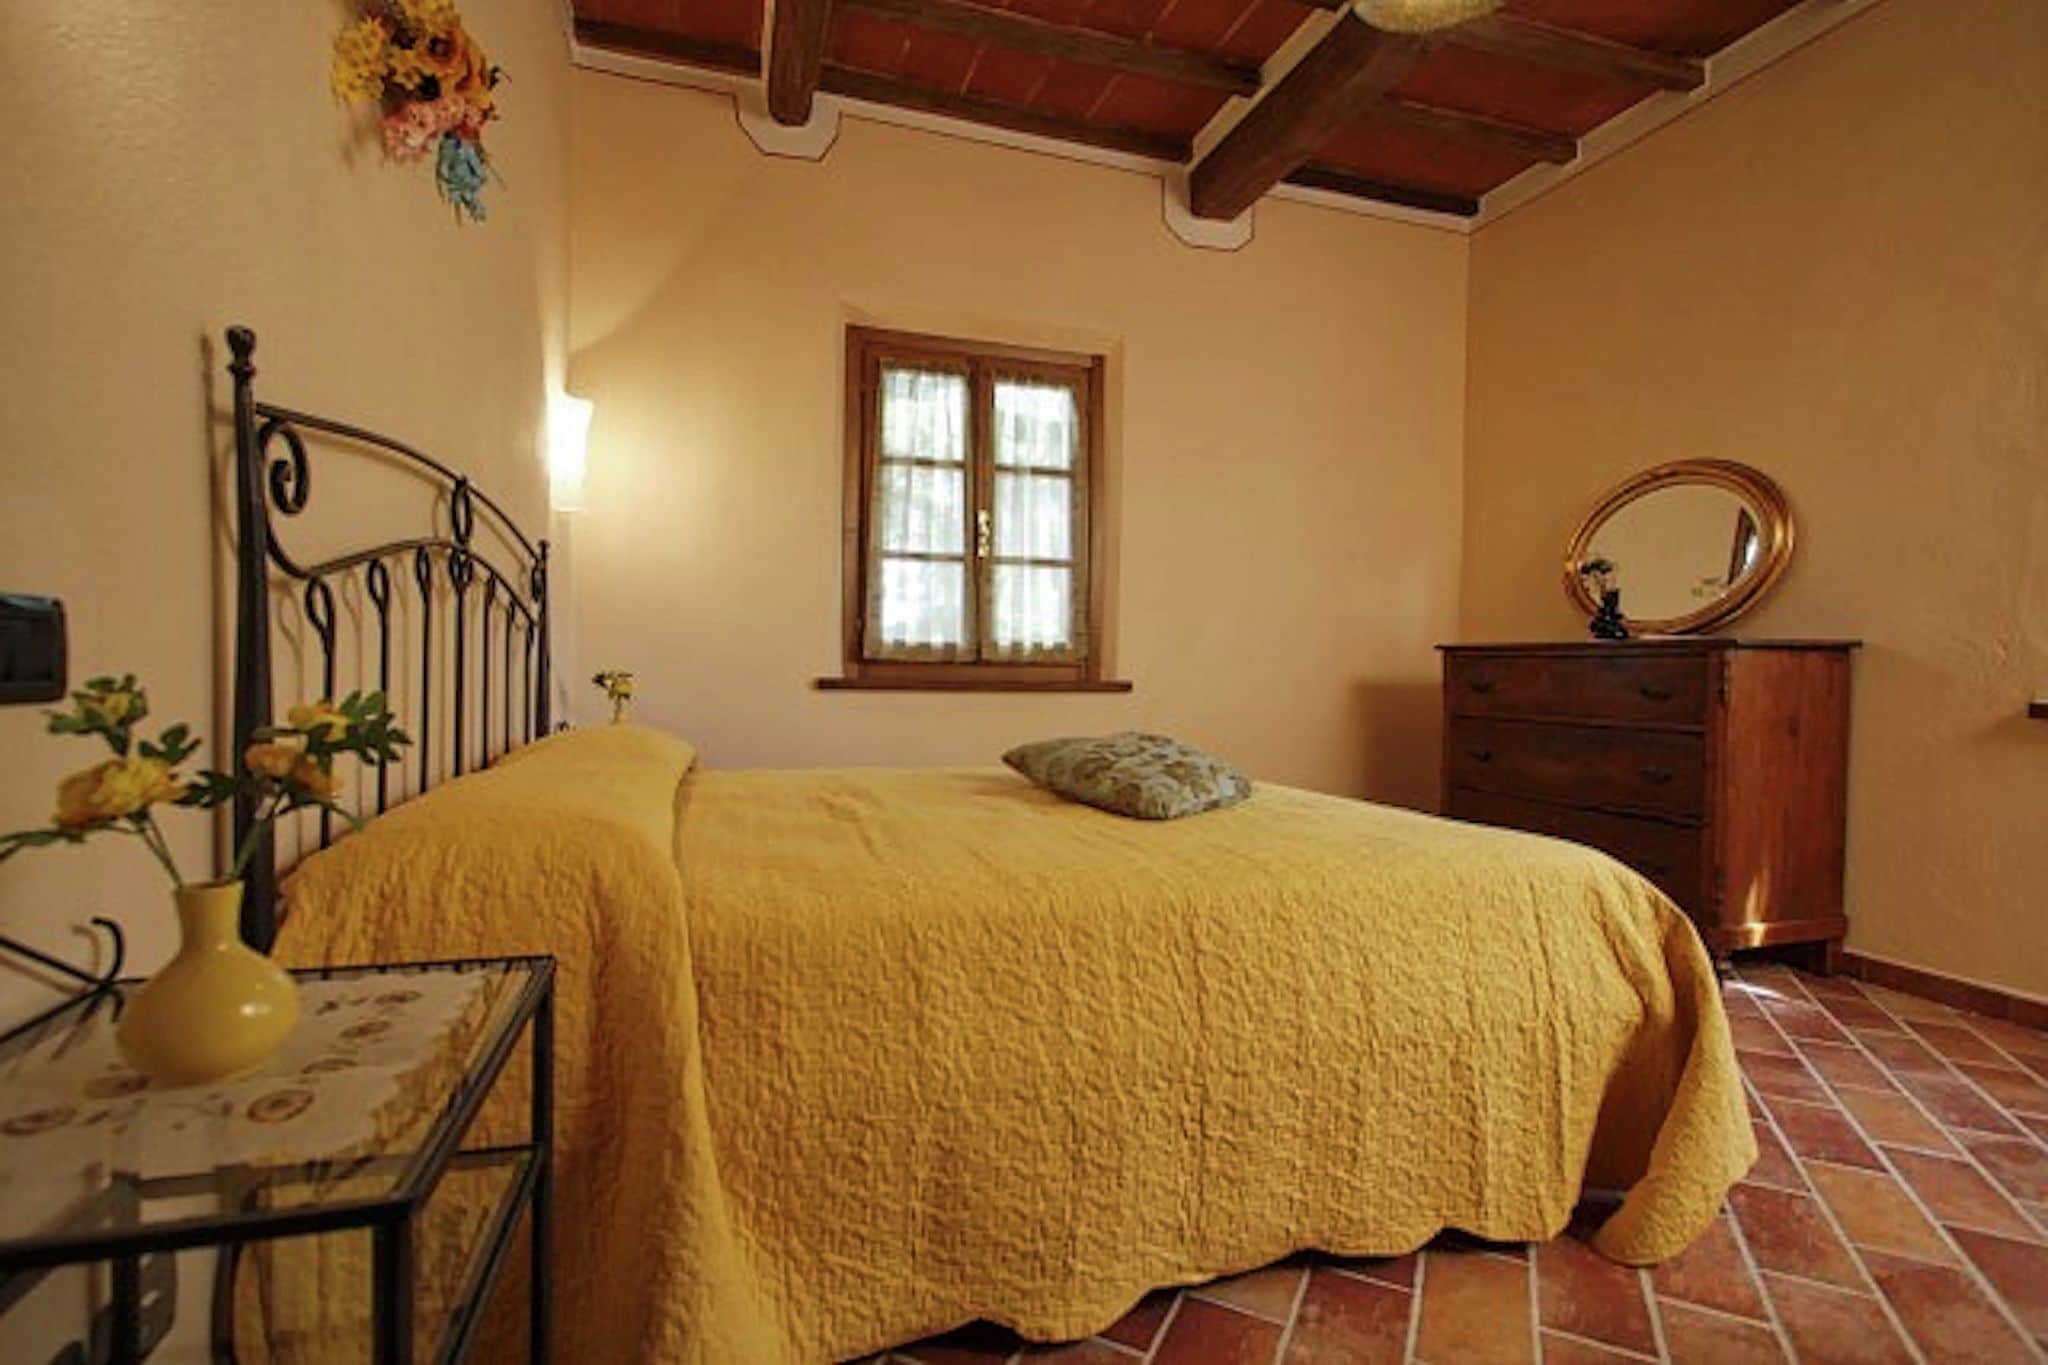 Villa with private pool near Cortona in the calm countryside and hilly landscape